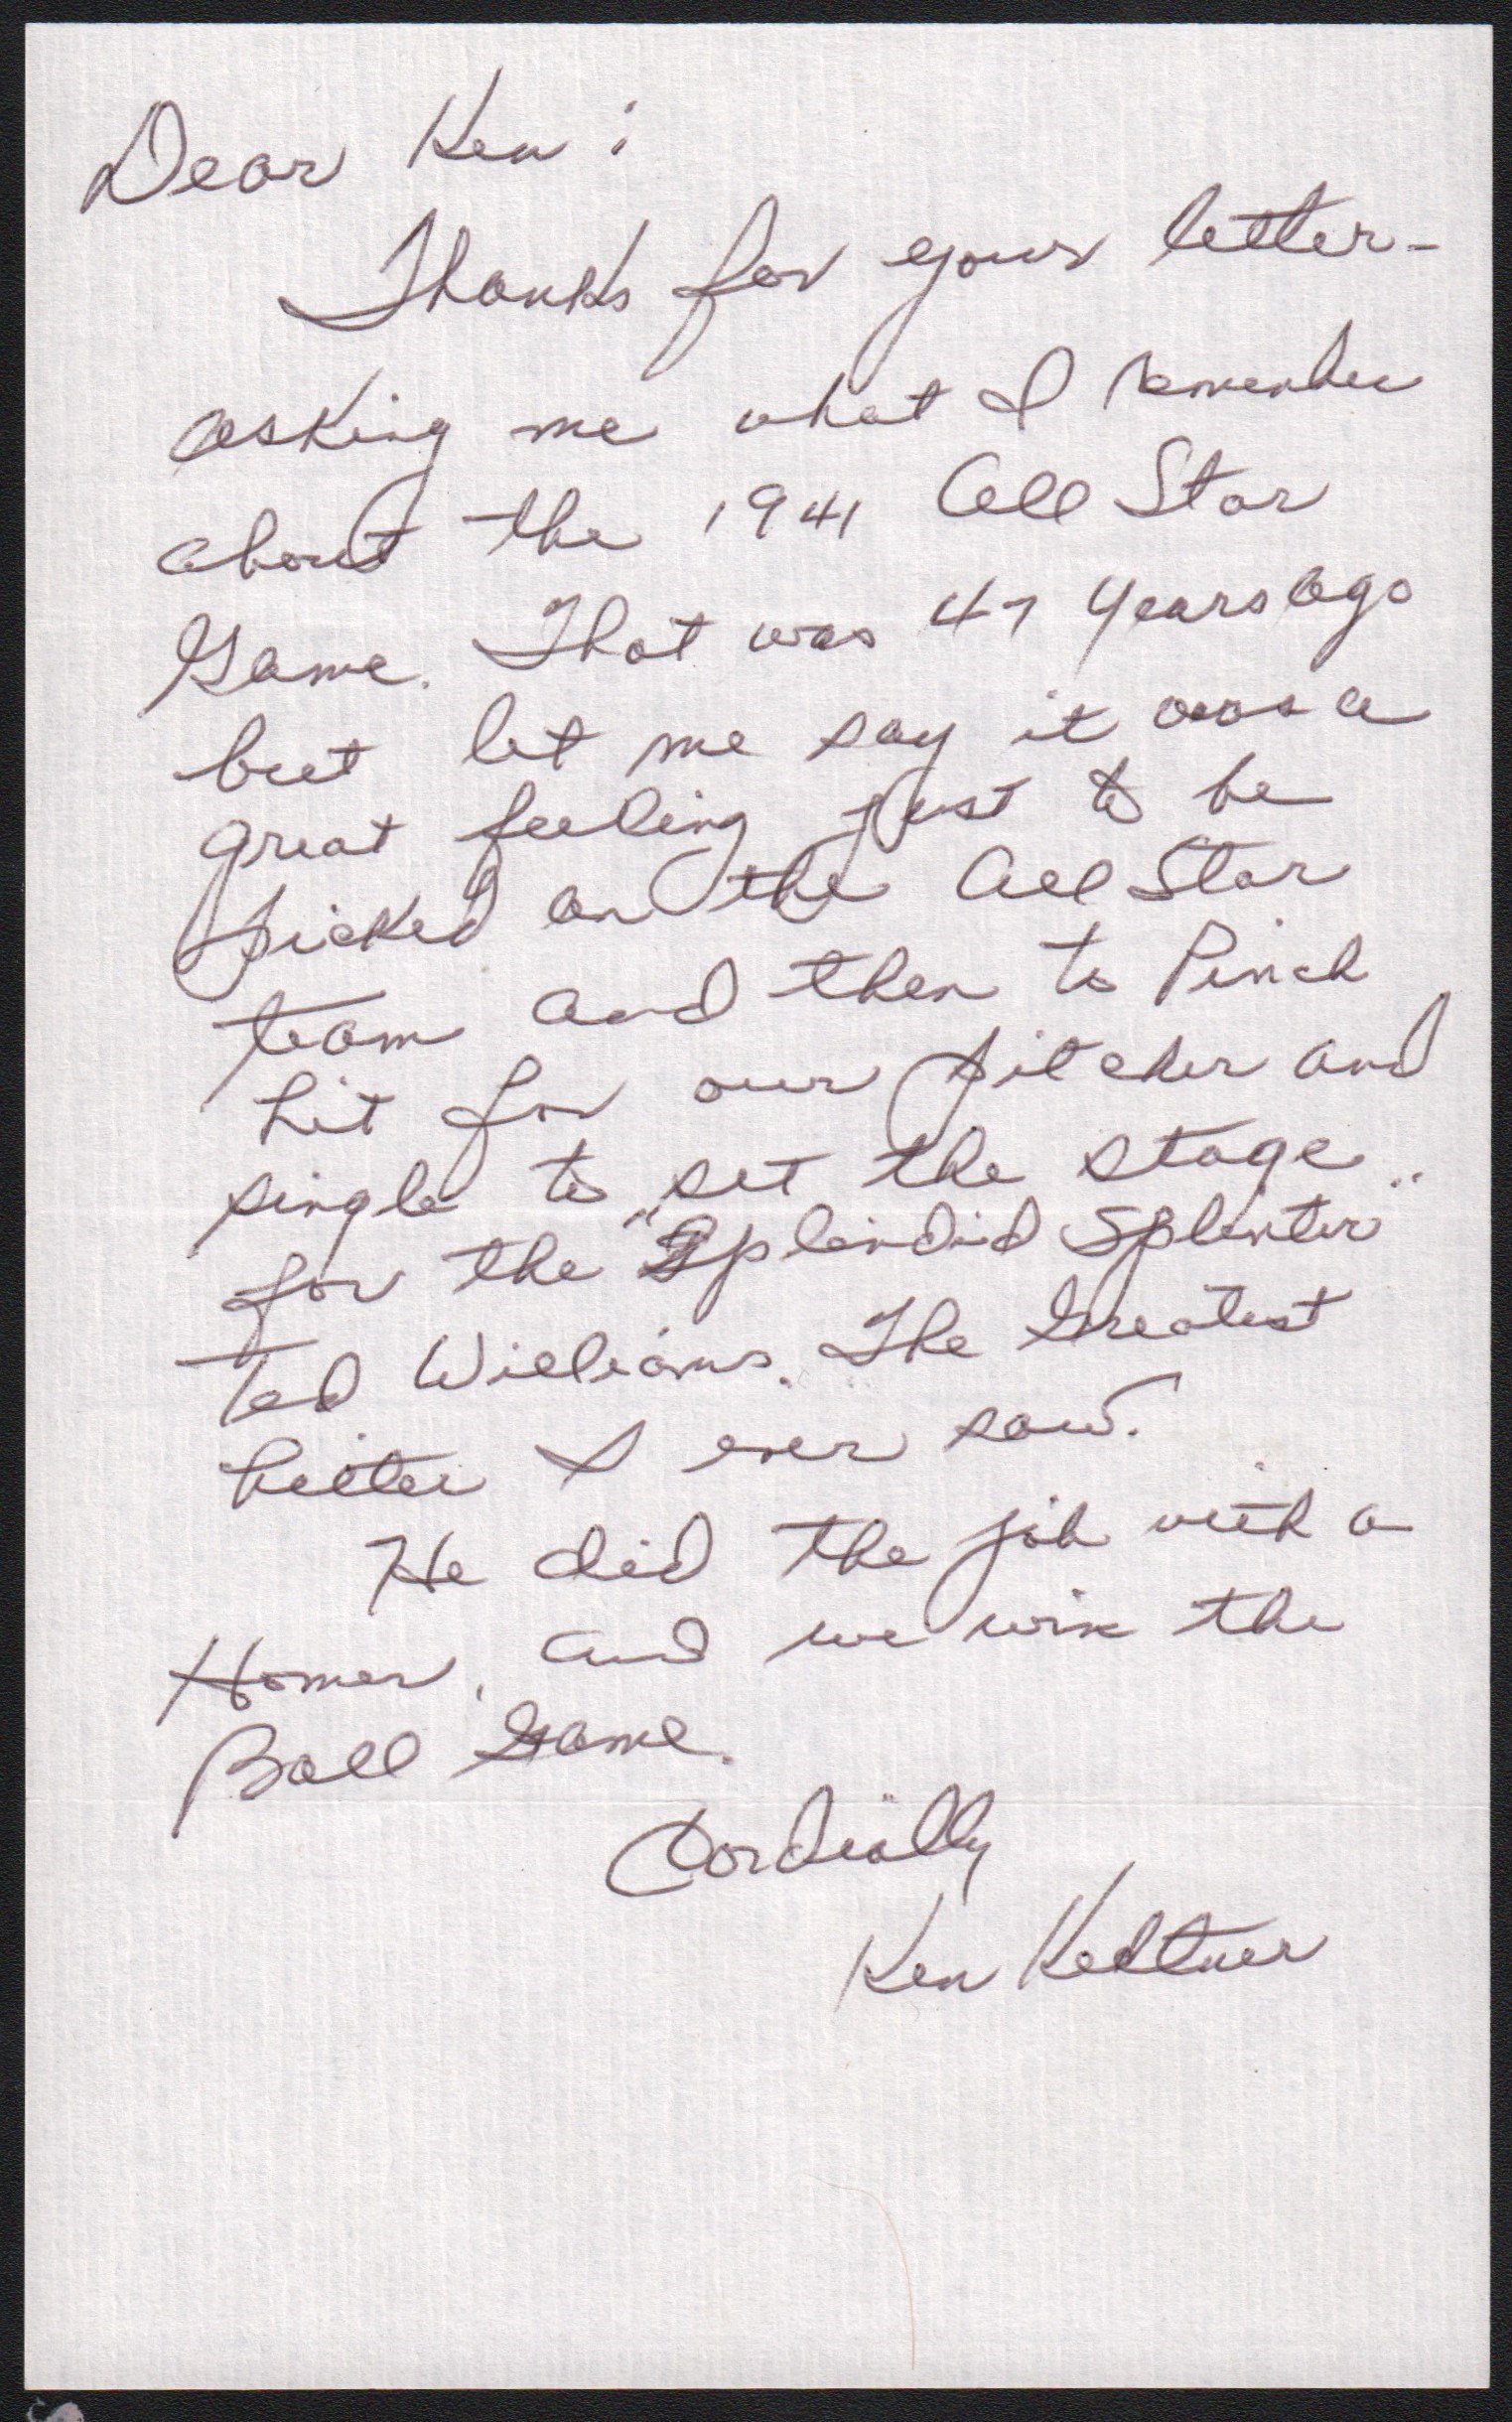 Baseball Autographs - Ken Keltner Handwritten Letter with Ted Williams Famous 1941 All Star Game HR Content